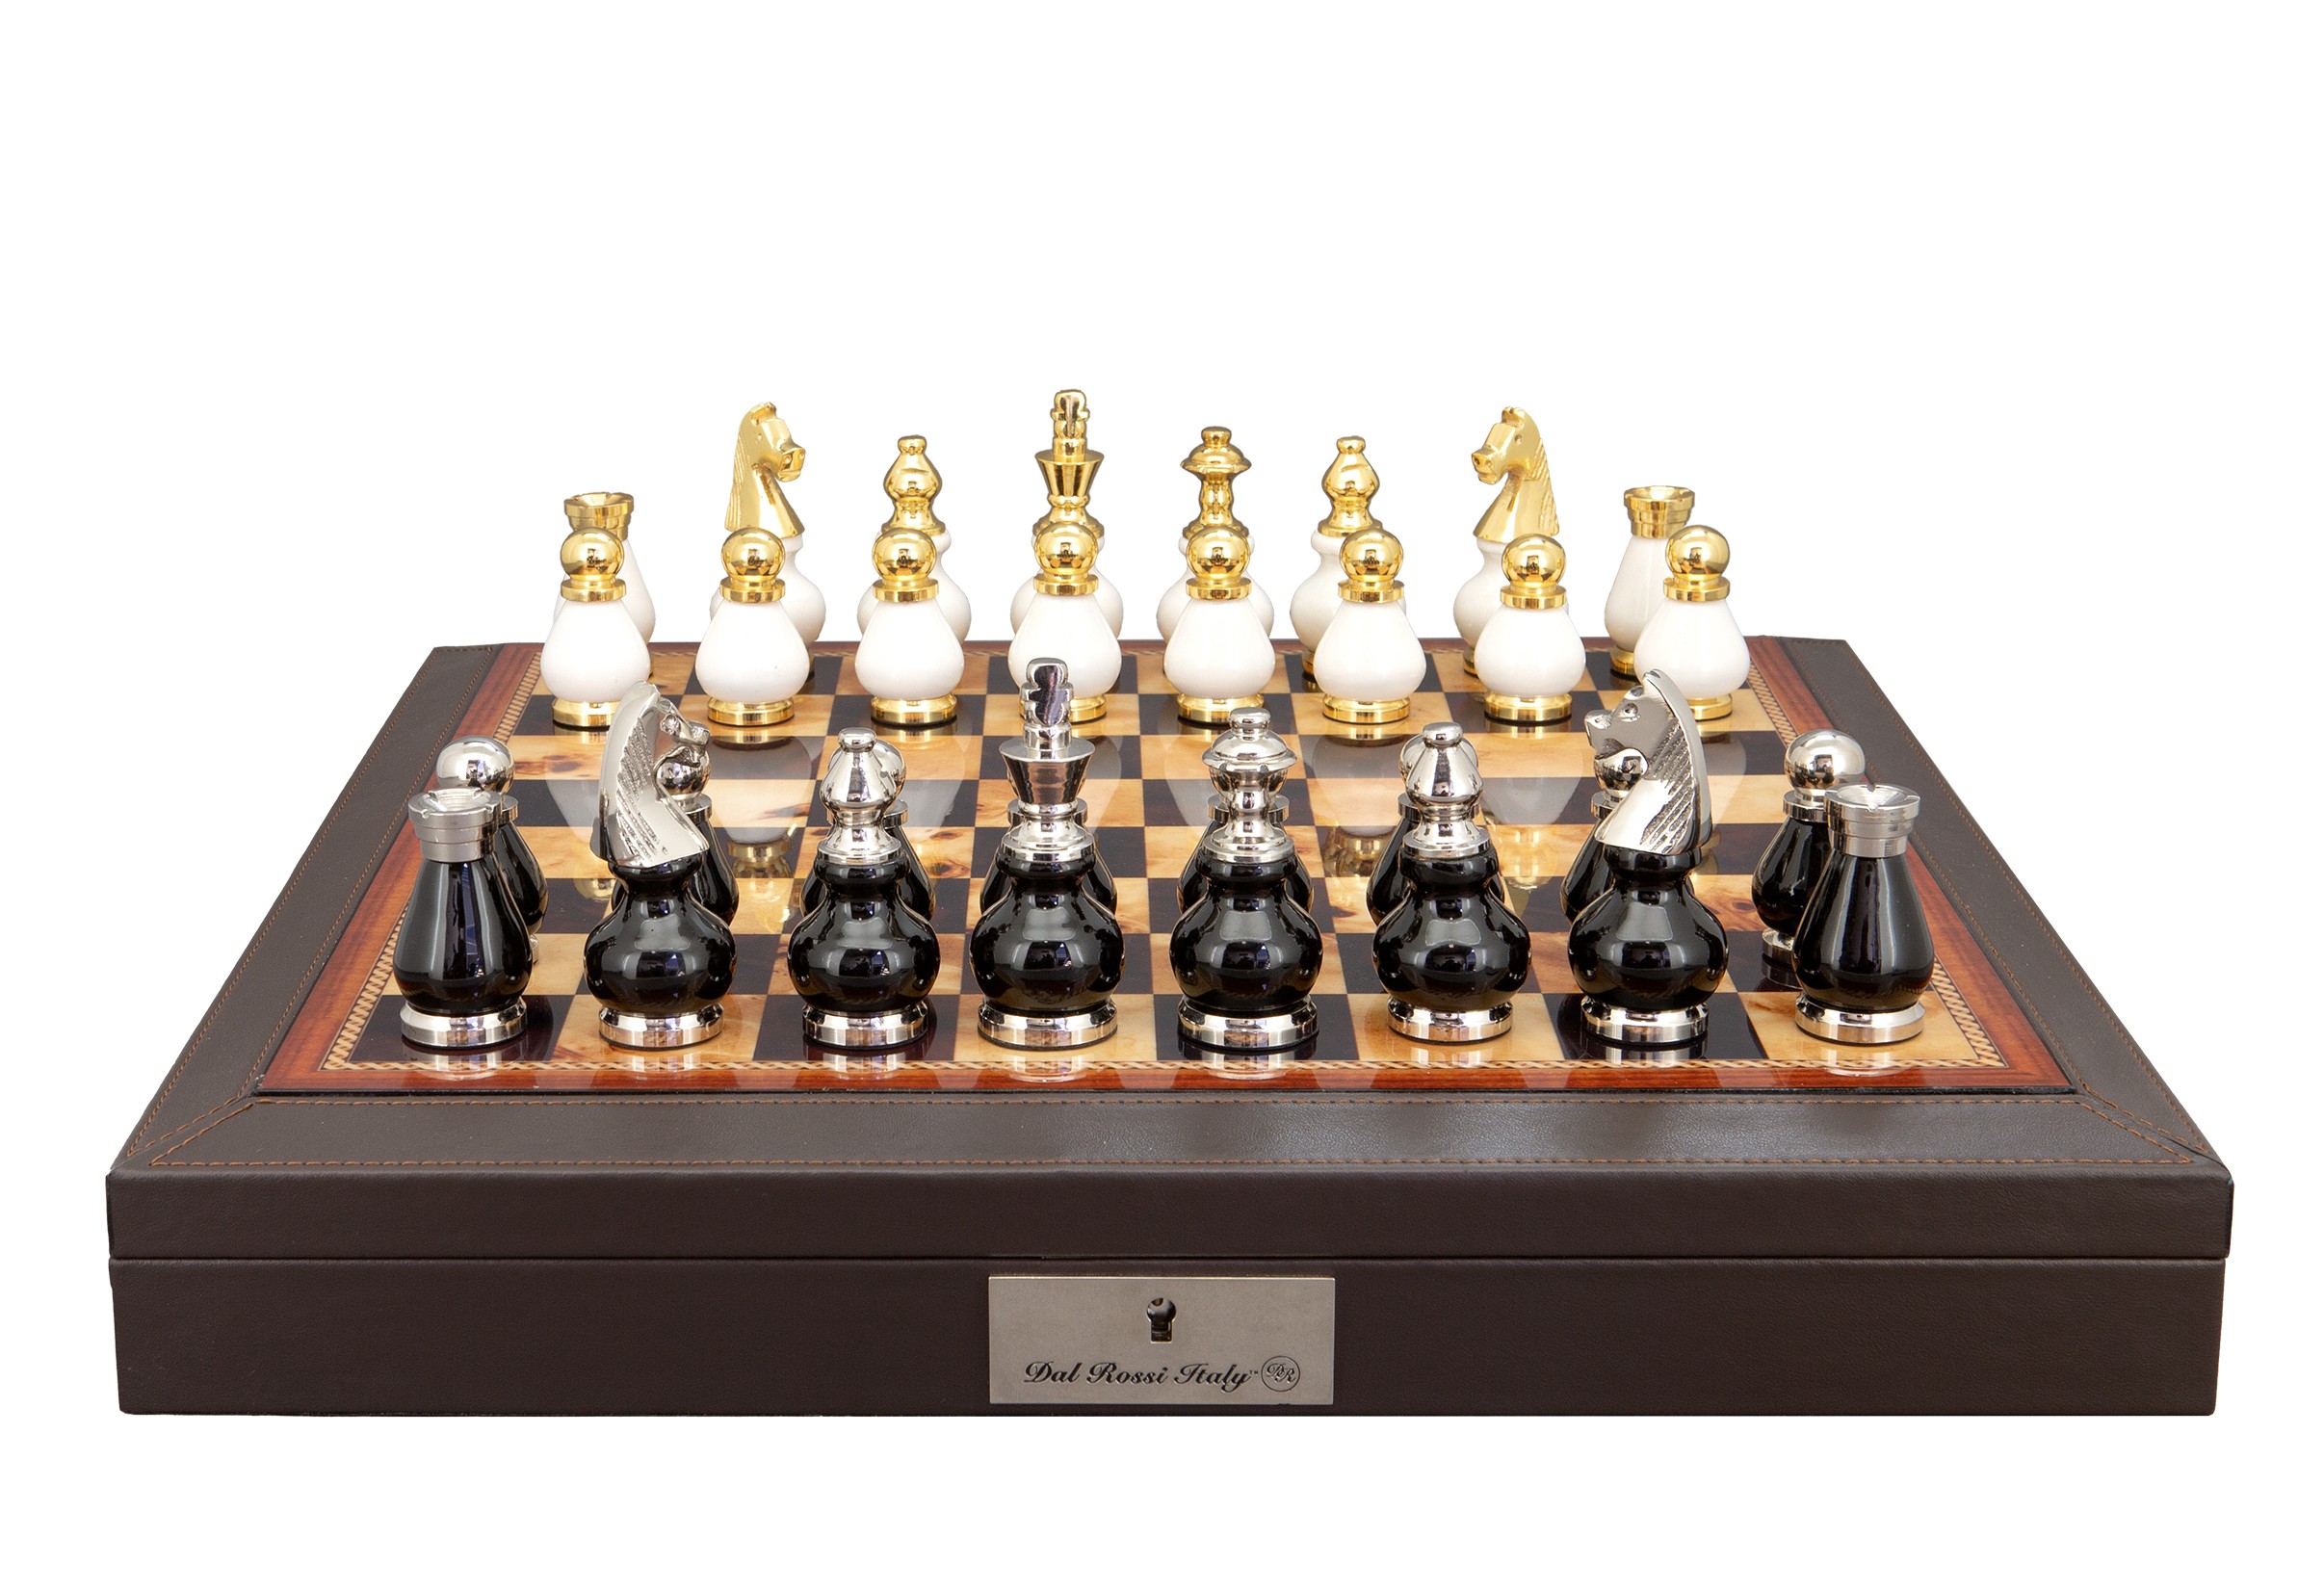 Dal Rossi Italy, Black and White with Gold and Silver Tops and Bottoms Chessmen 90mm on a Brown PU Leather Bevelled Edge chess box with compartments 18"